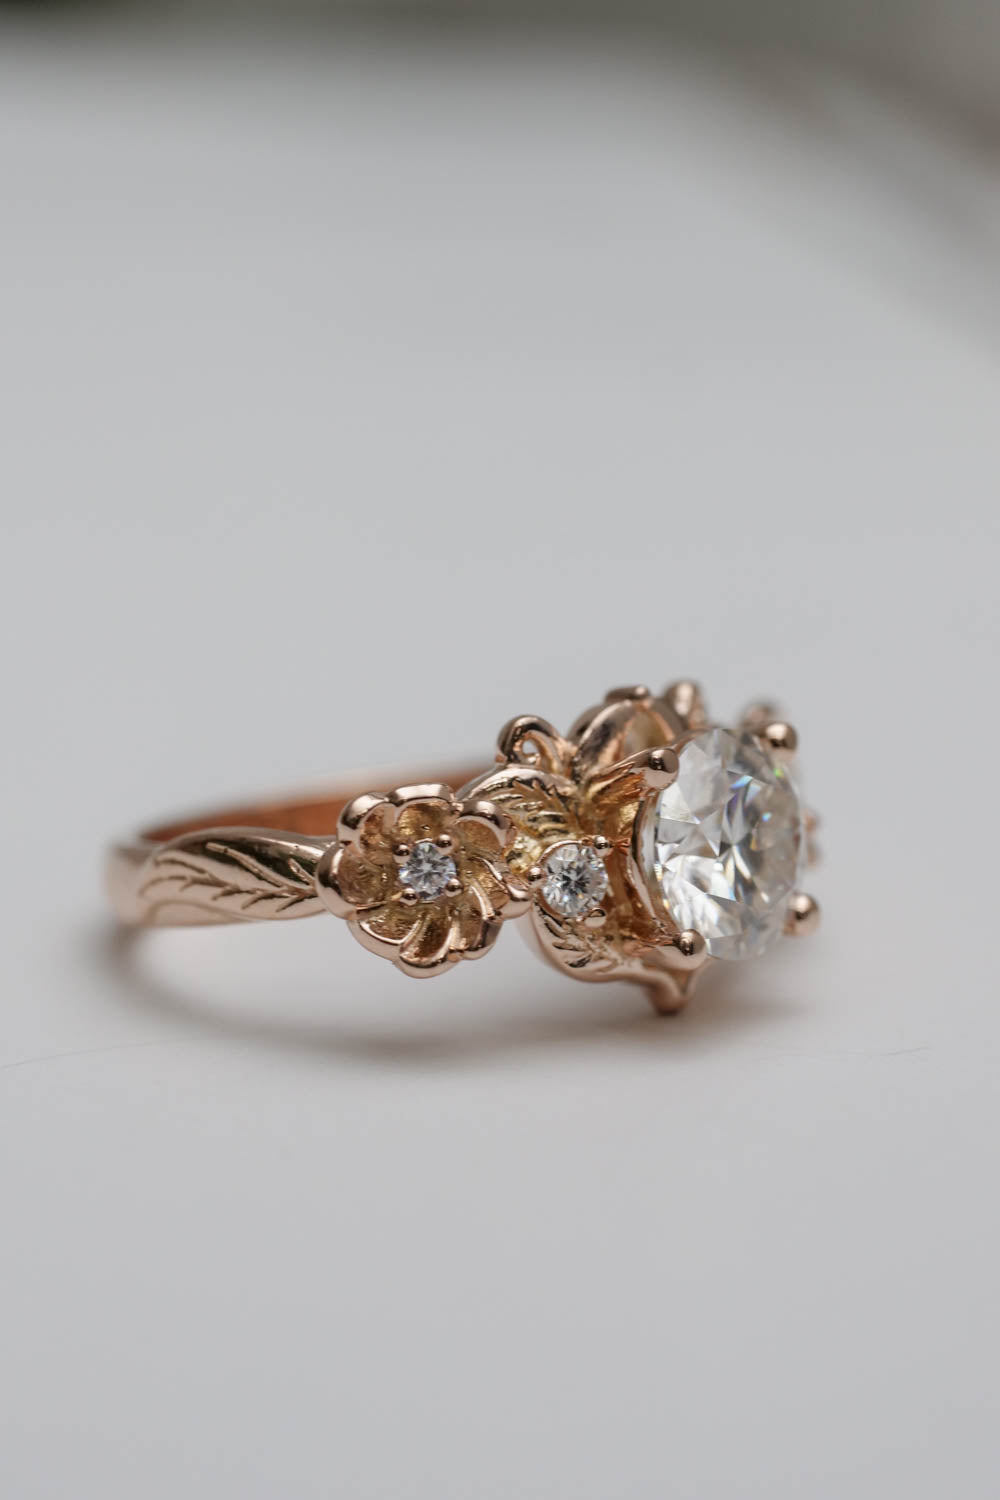 floral engagement rings with moissanite,  handmade ring for engagement  wiht round gemstone in the center